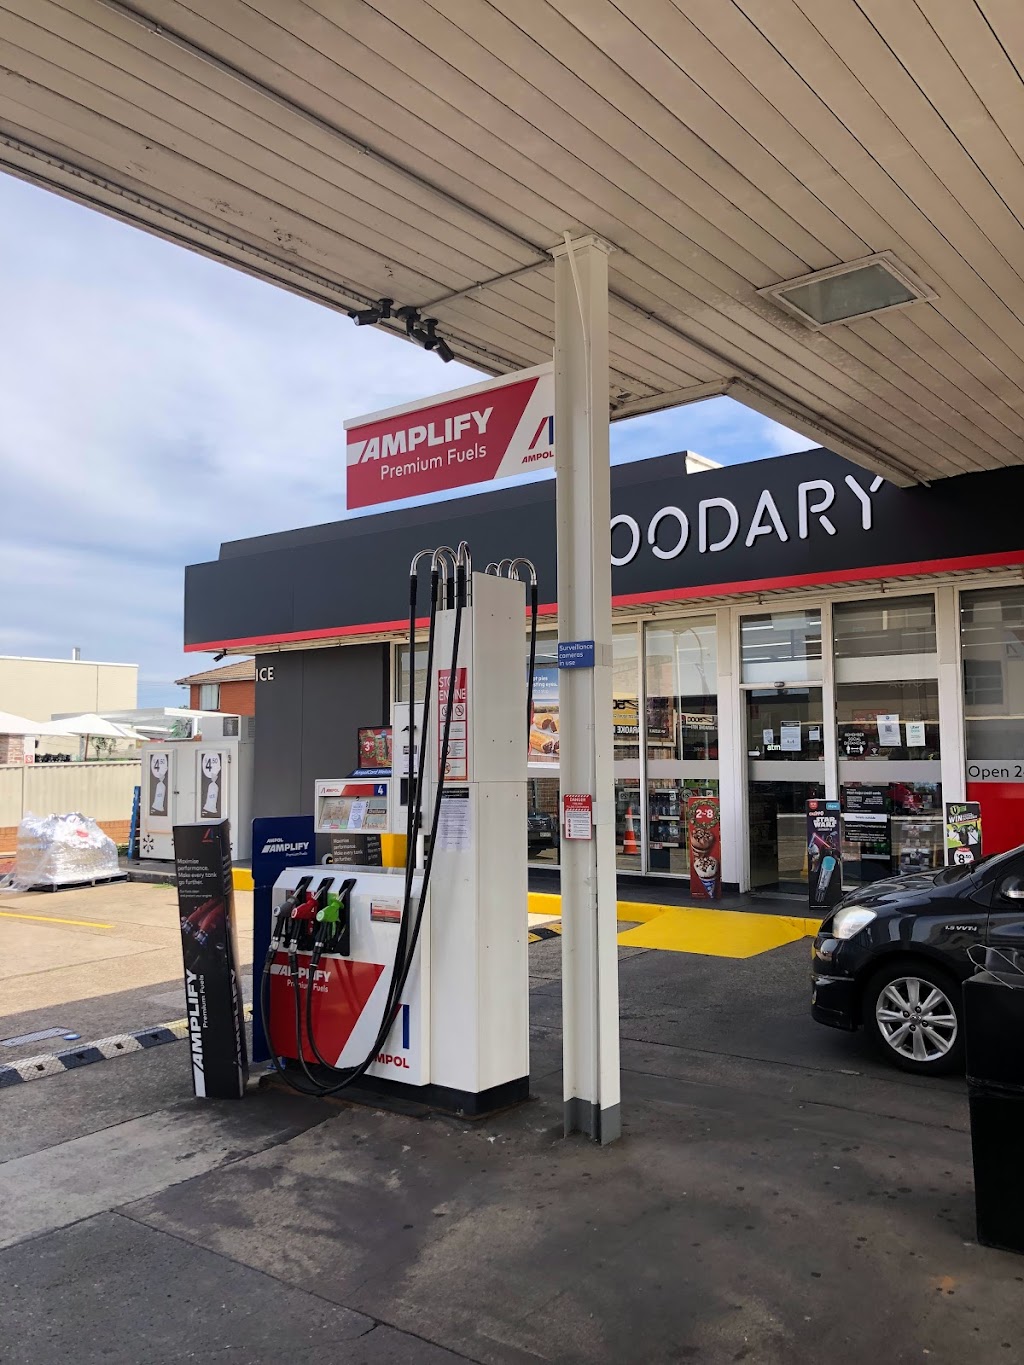 Ampol Foodary Canley Heights | gas station | 282 Canley Vale Rd, Canley Heights NSW 2166, Australia | 0297243297 OR +61 2 9724 3297